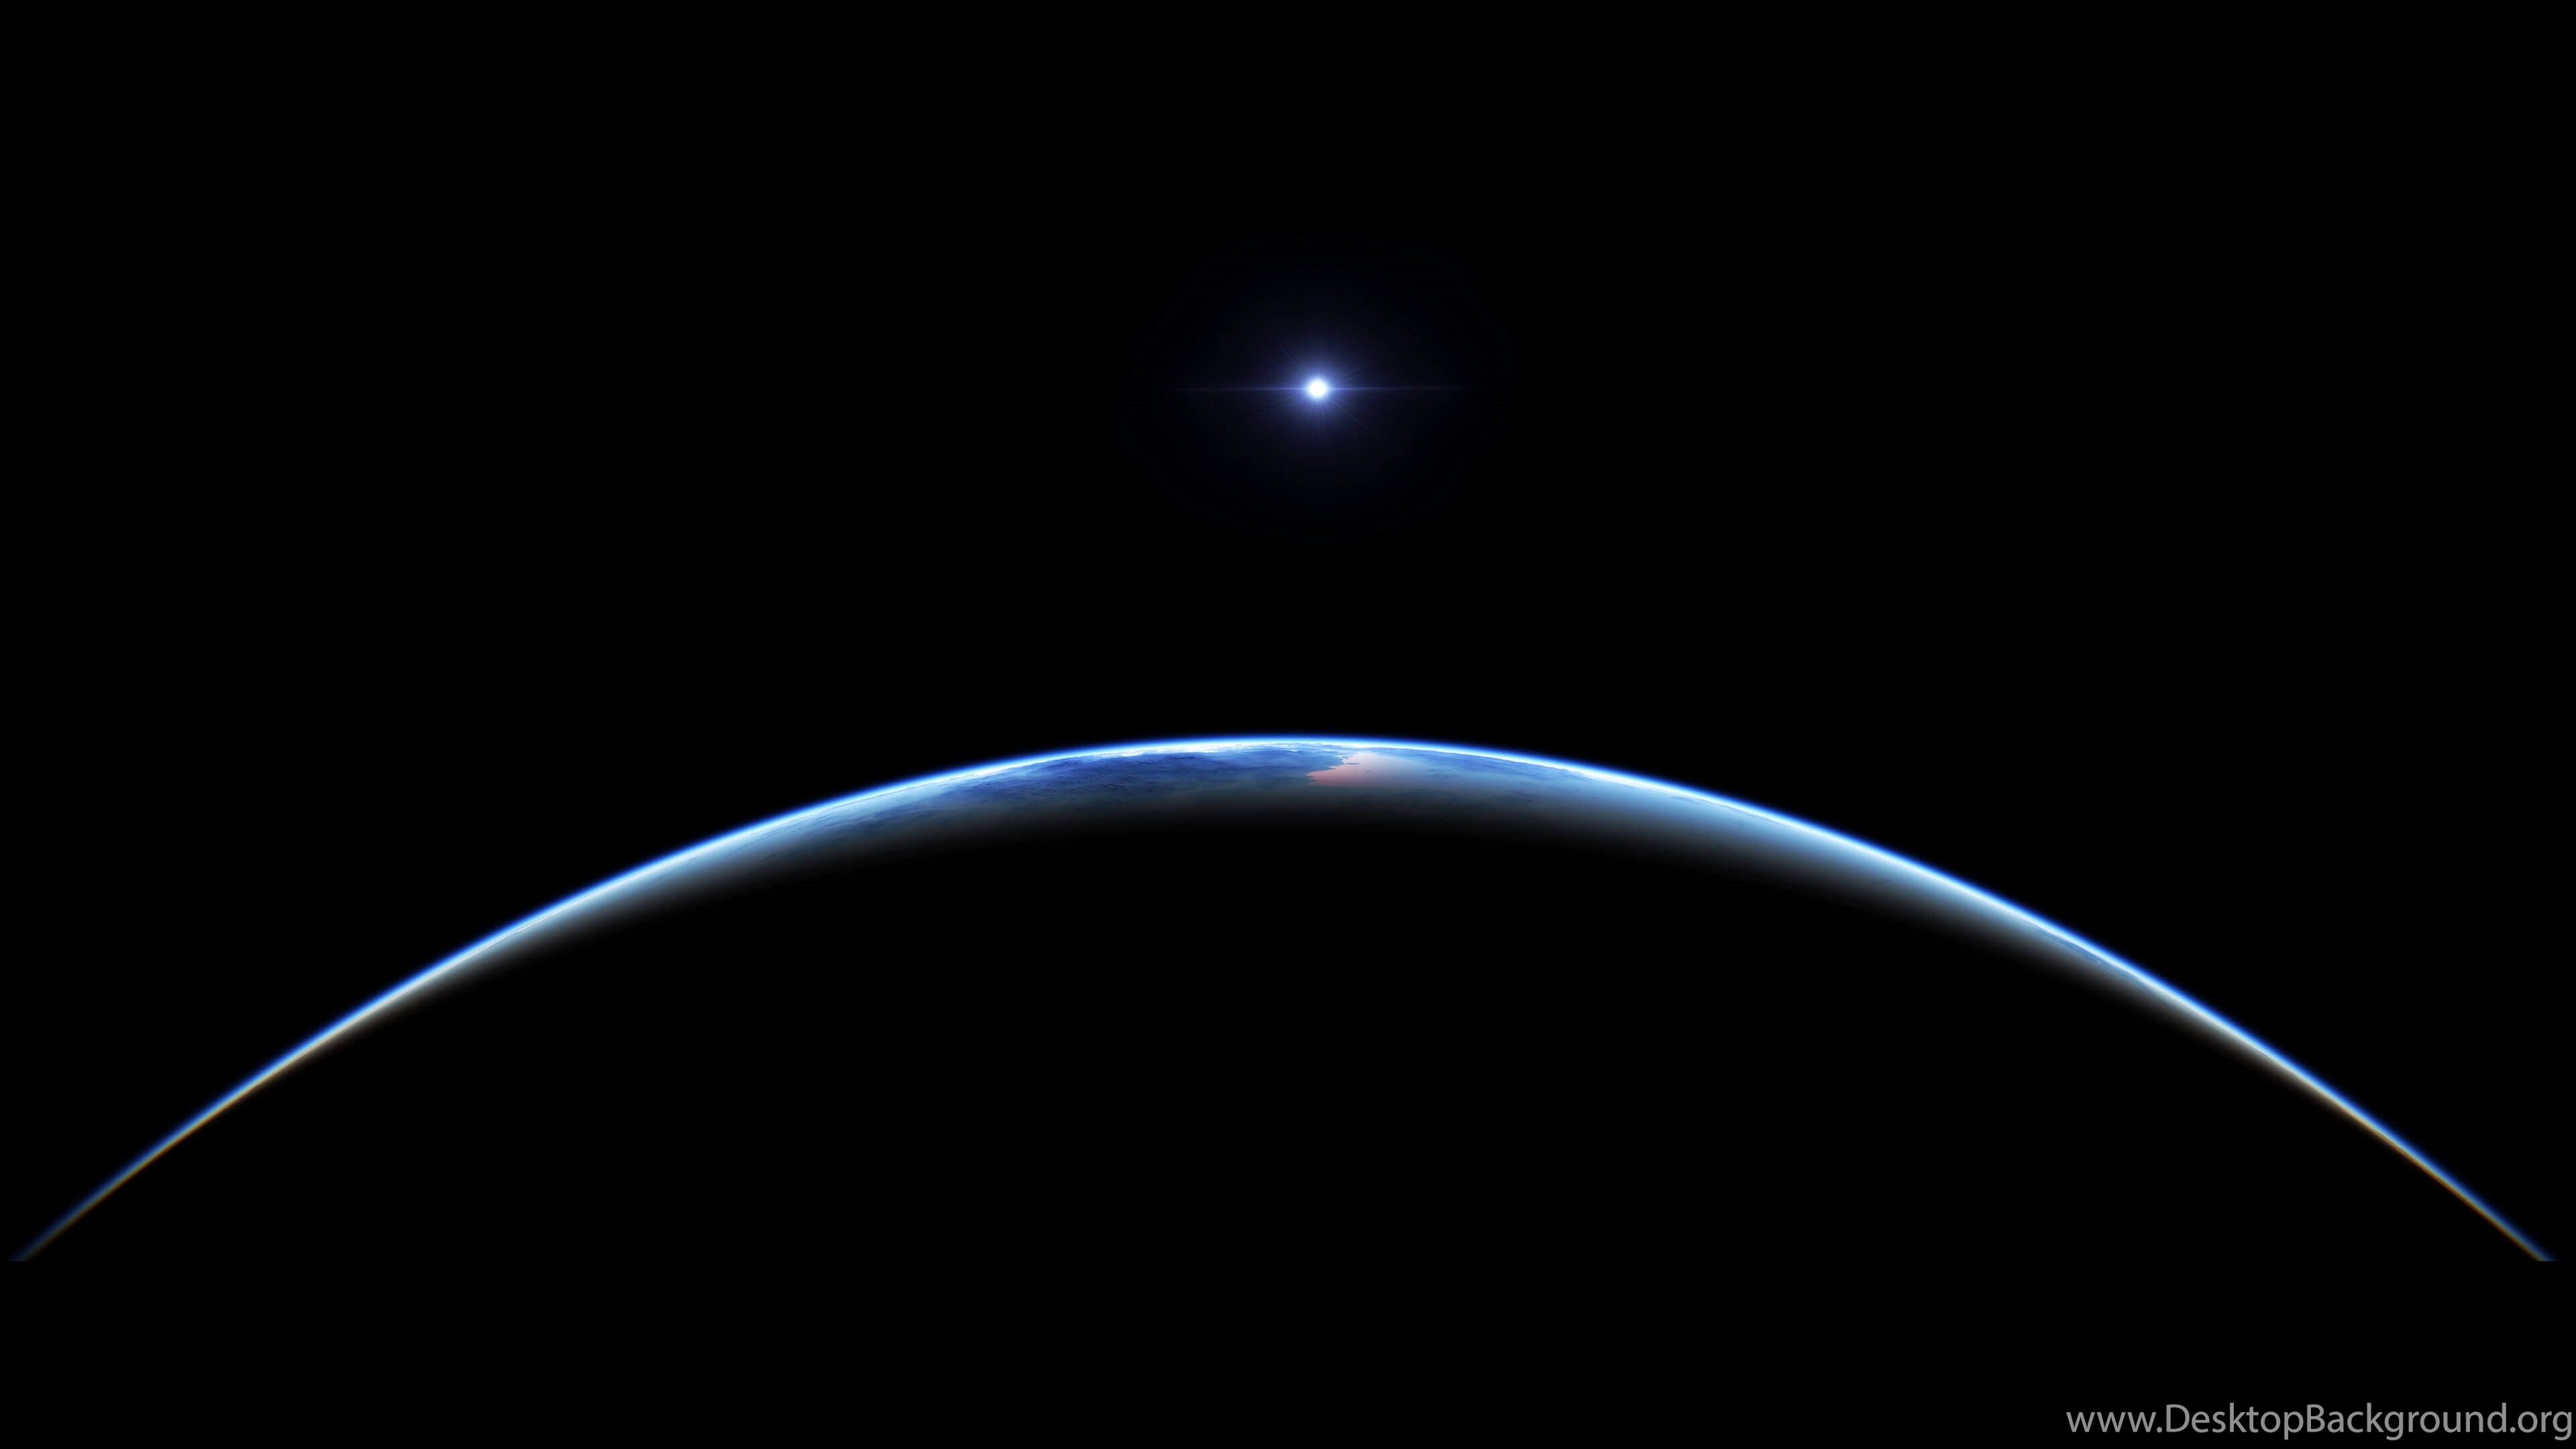 3840x2160 Earth At Night View From Space 4k Wallpaper Desktop Background